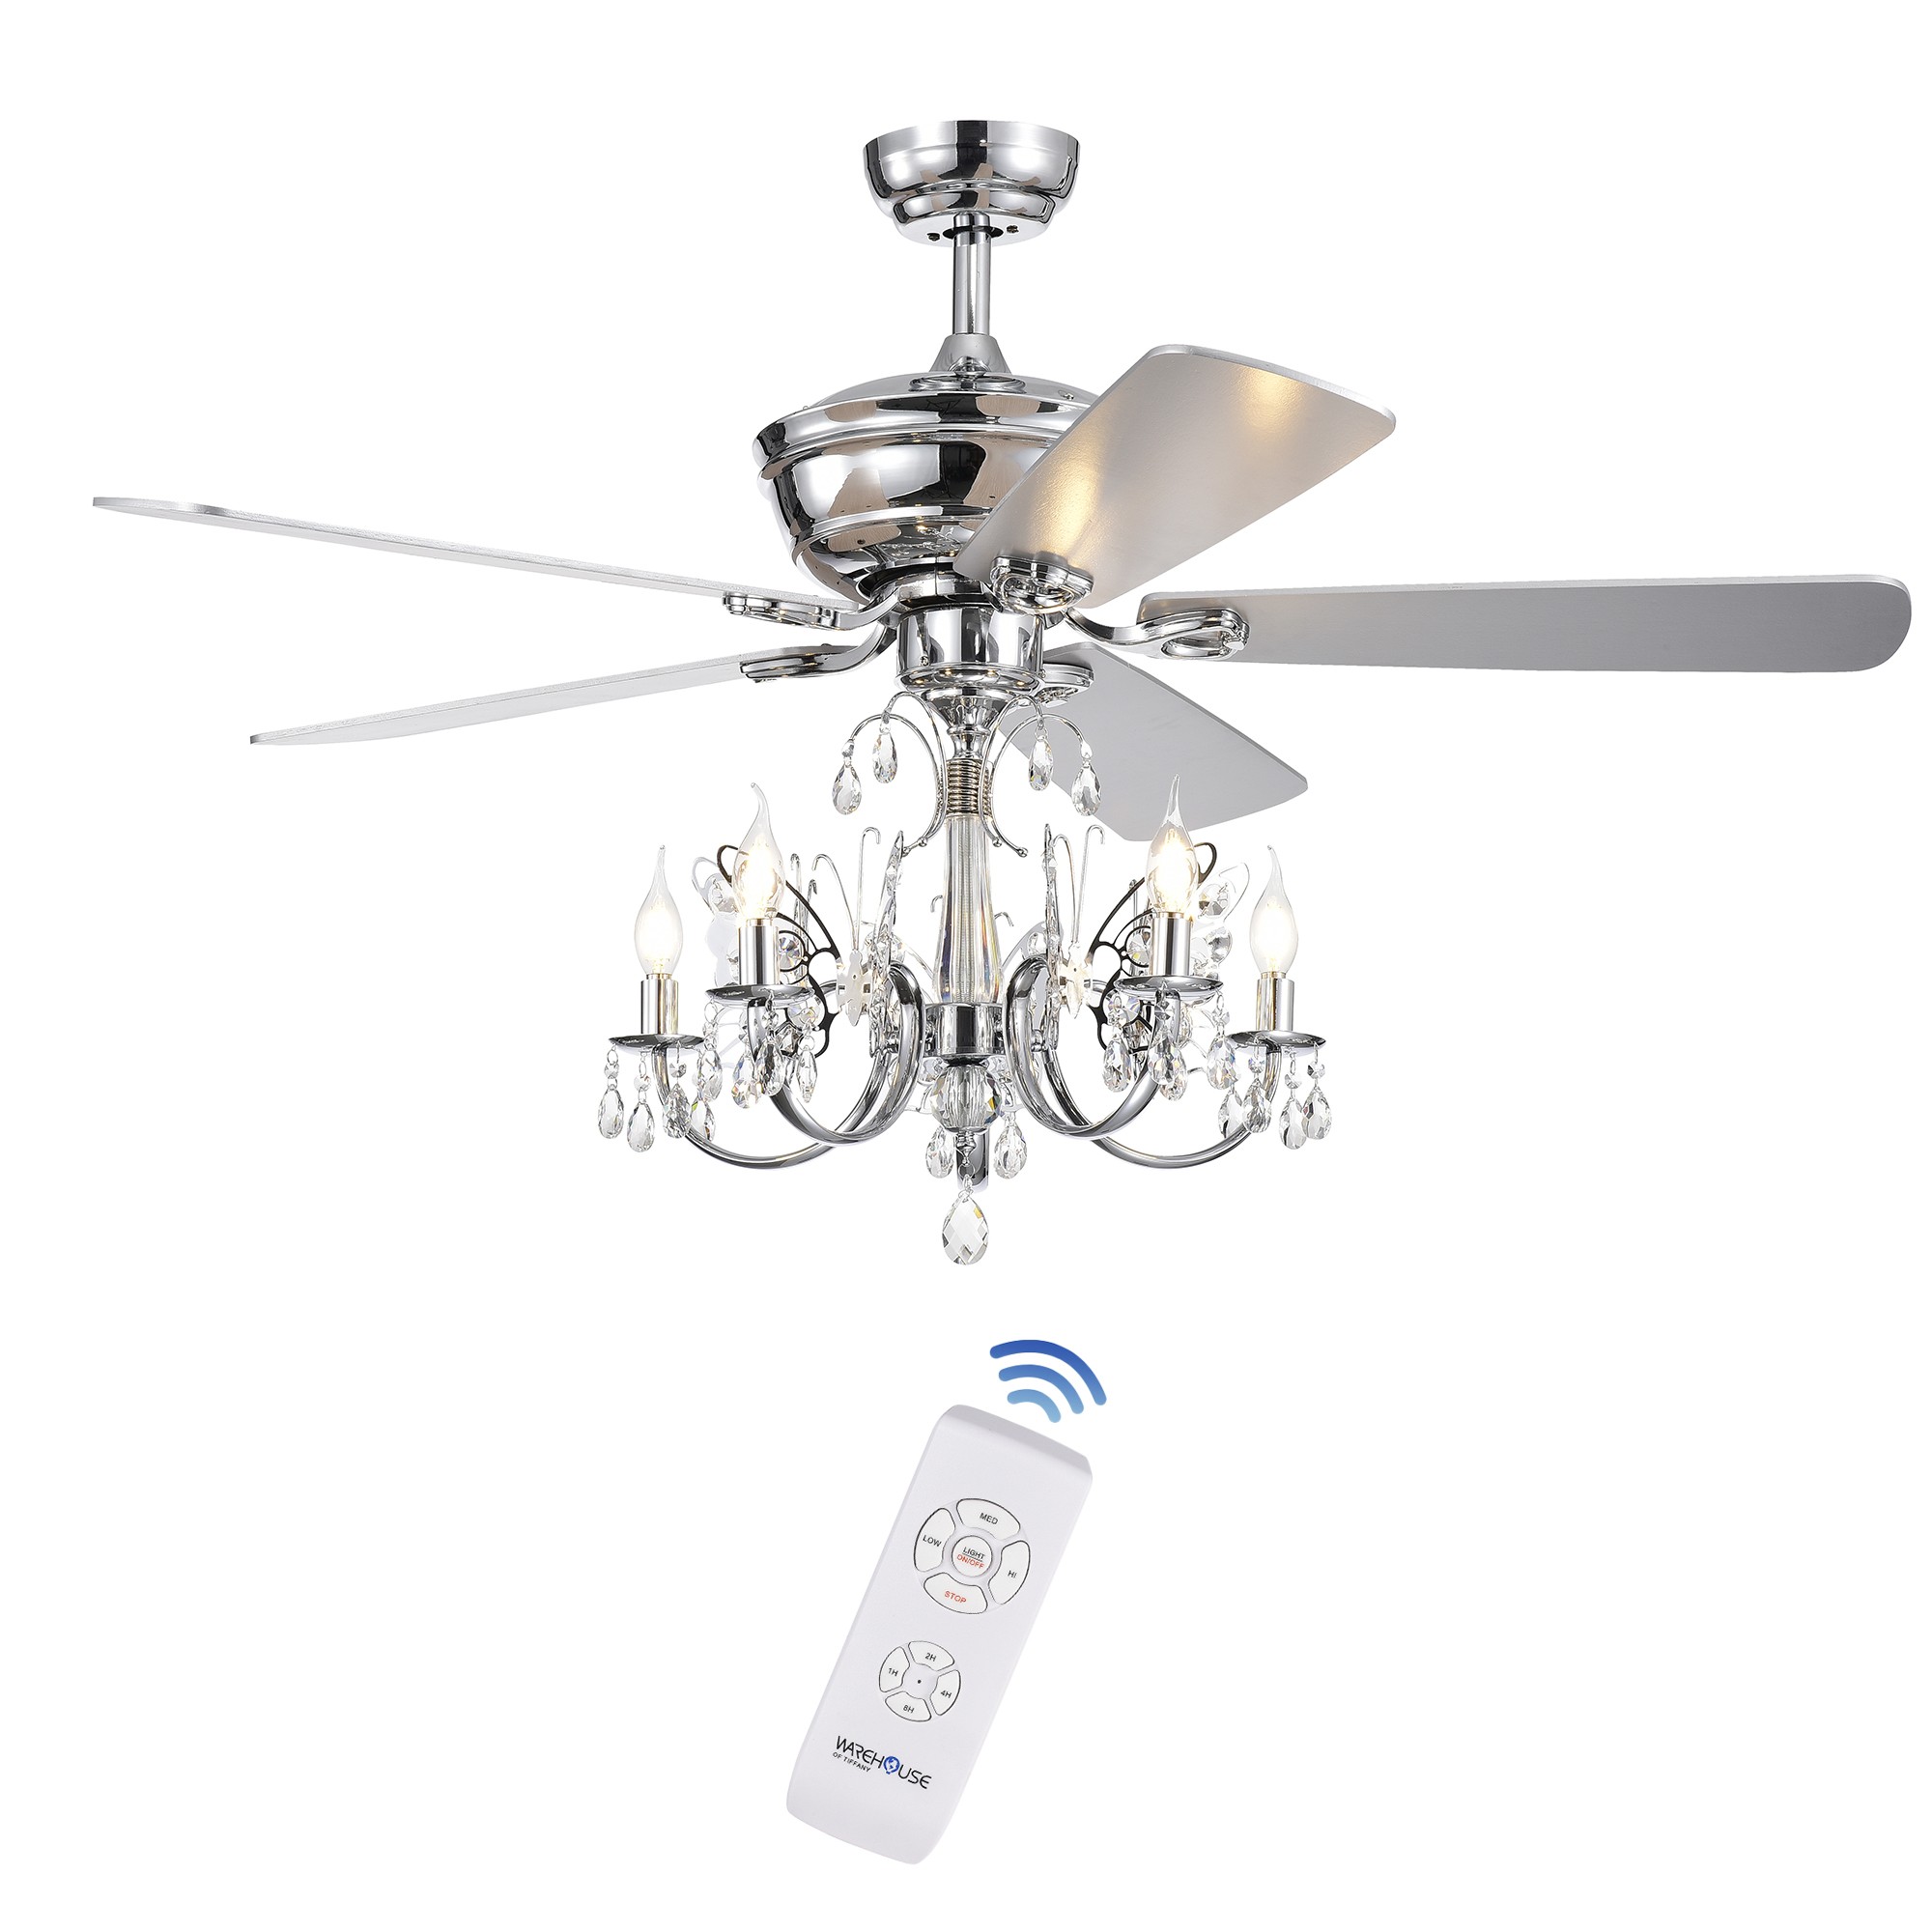 Silver Orchid Finlayson 52-inch 5-light Chrome Lighted Ceiling Fan with Reversible Blades